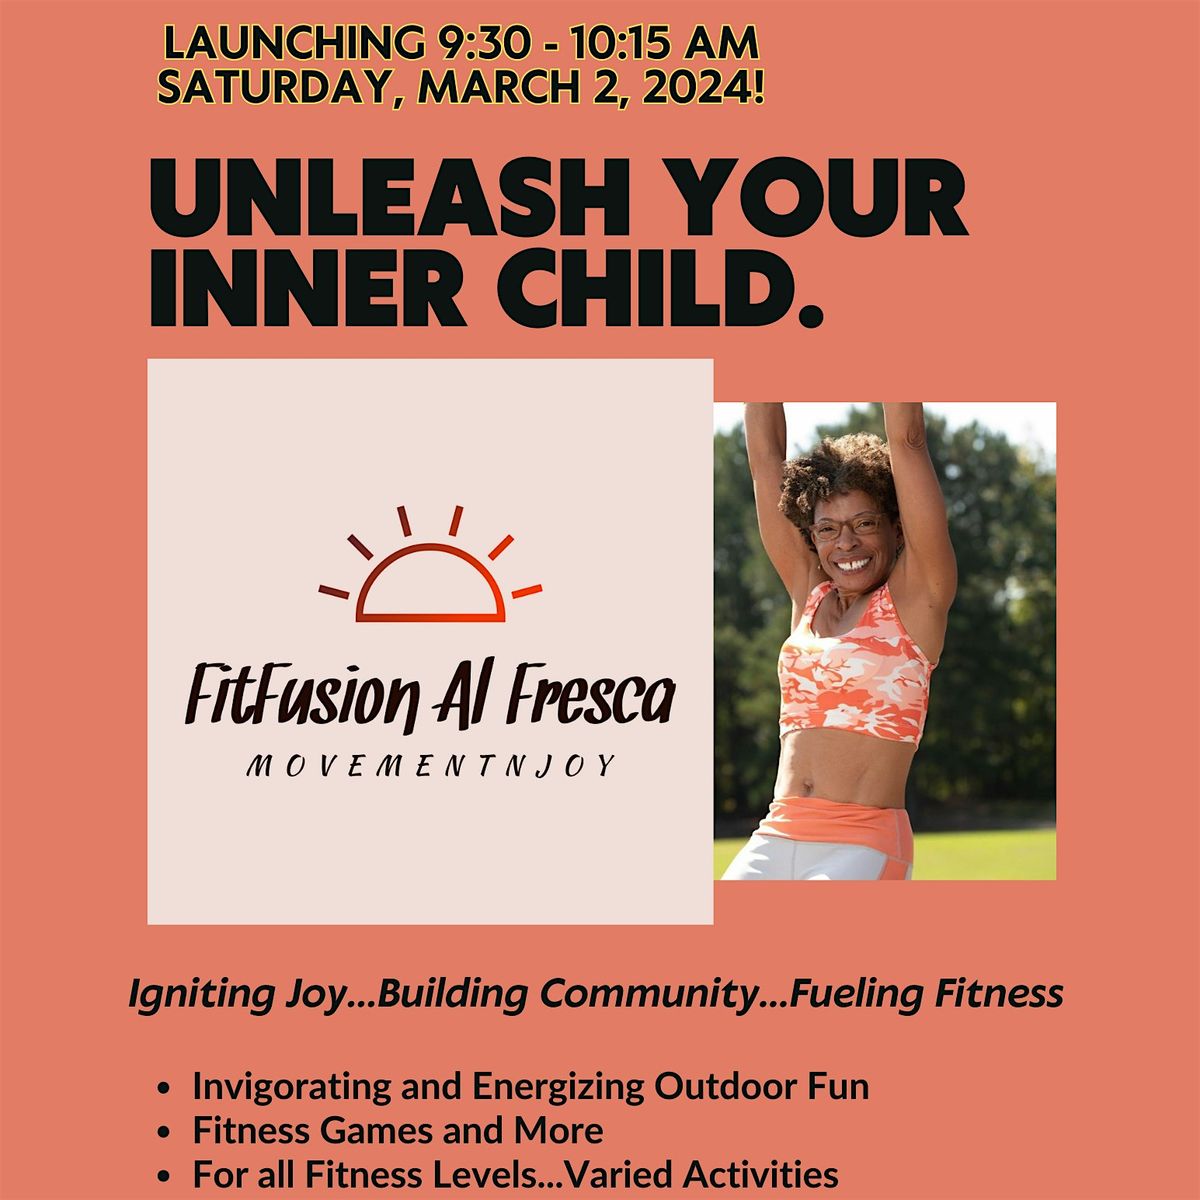 May 25th FitFusion Al Fresca! FREE for First timers!